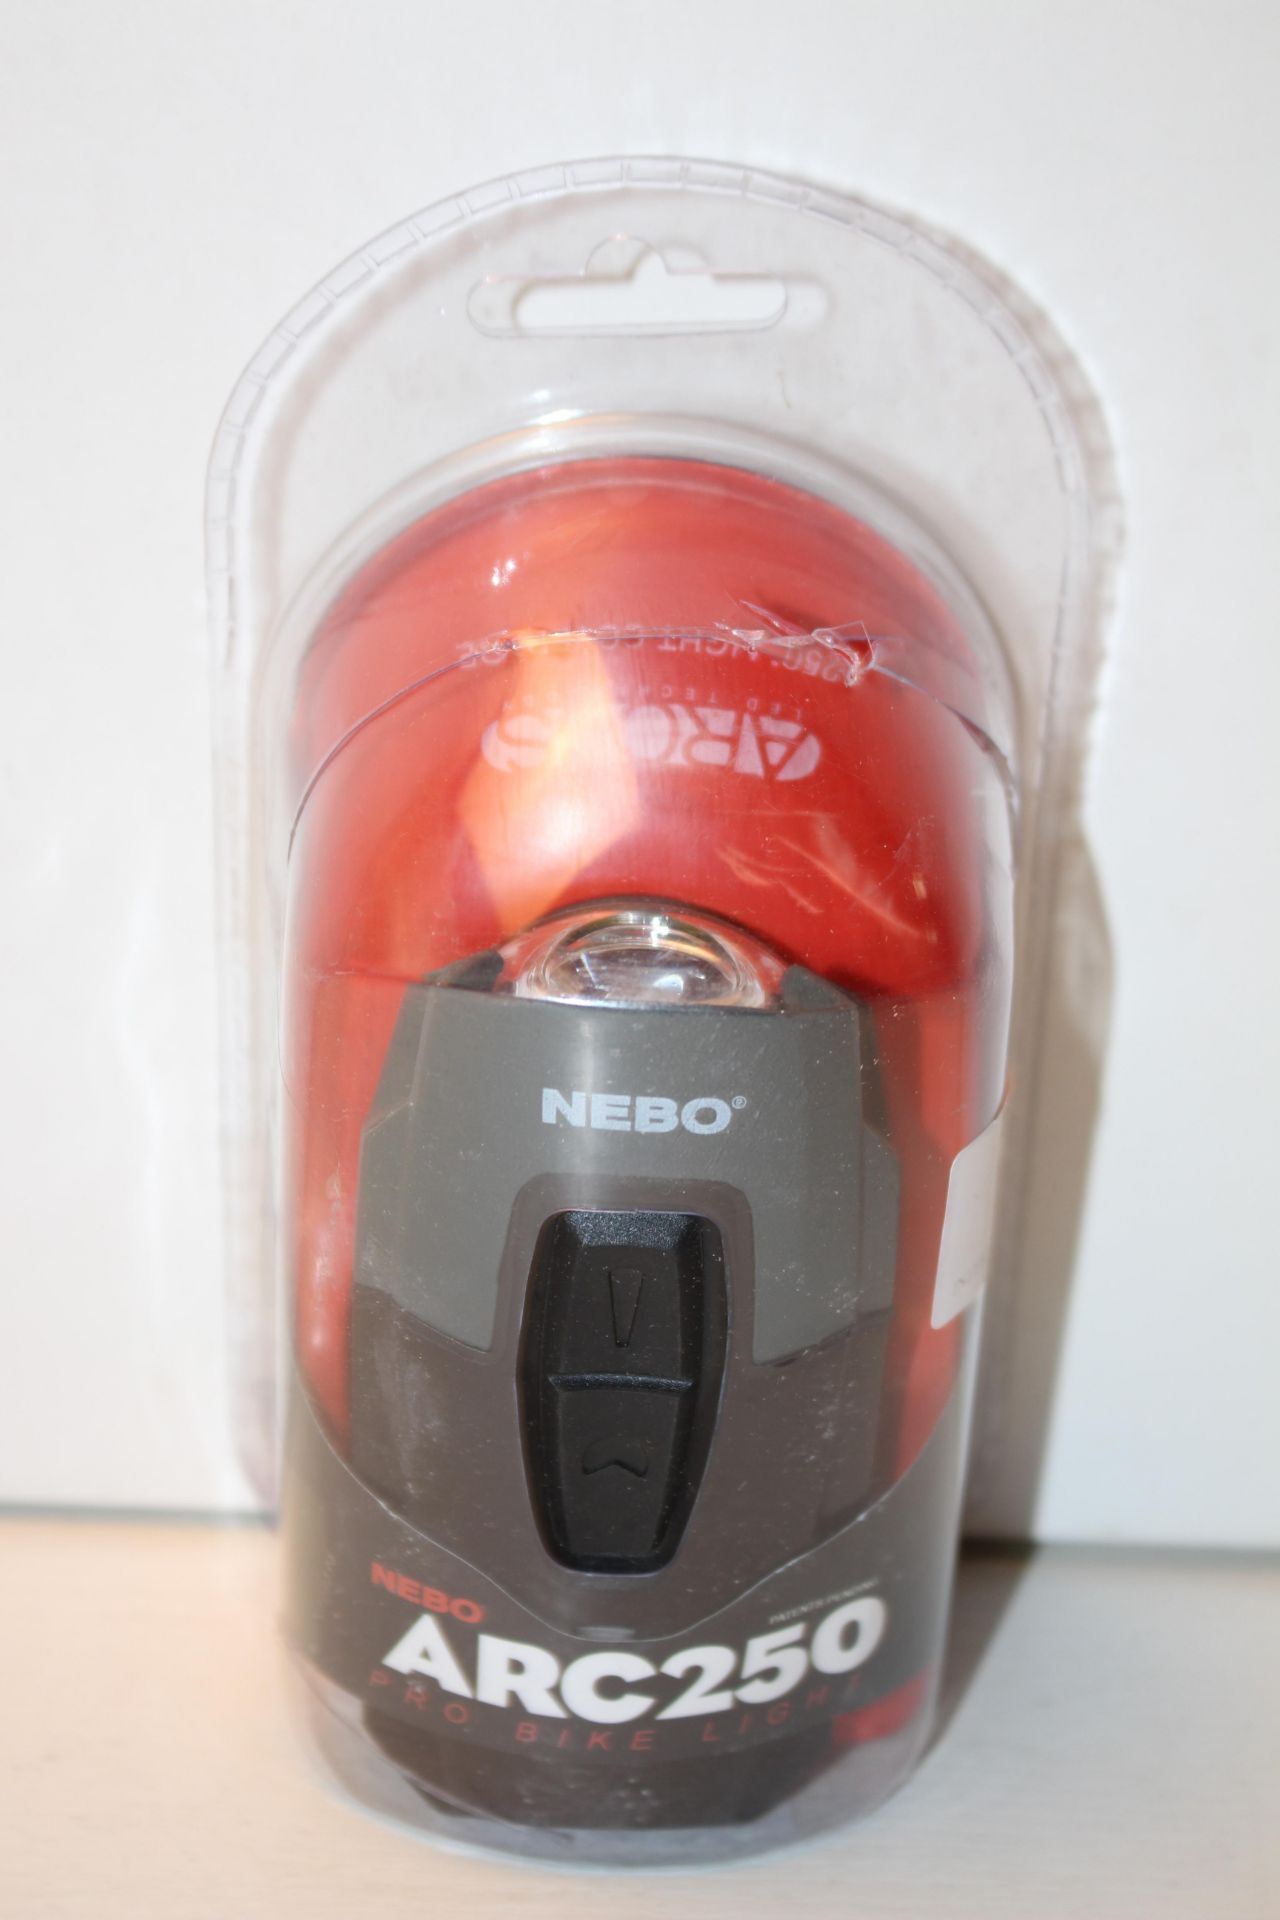 BOXED NEBO ARC250 PRO BIKE LIGHT RRP £17.50Condition ReportAppraisal Available on Request- All Items